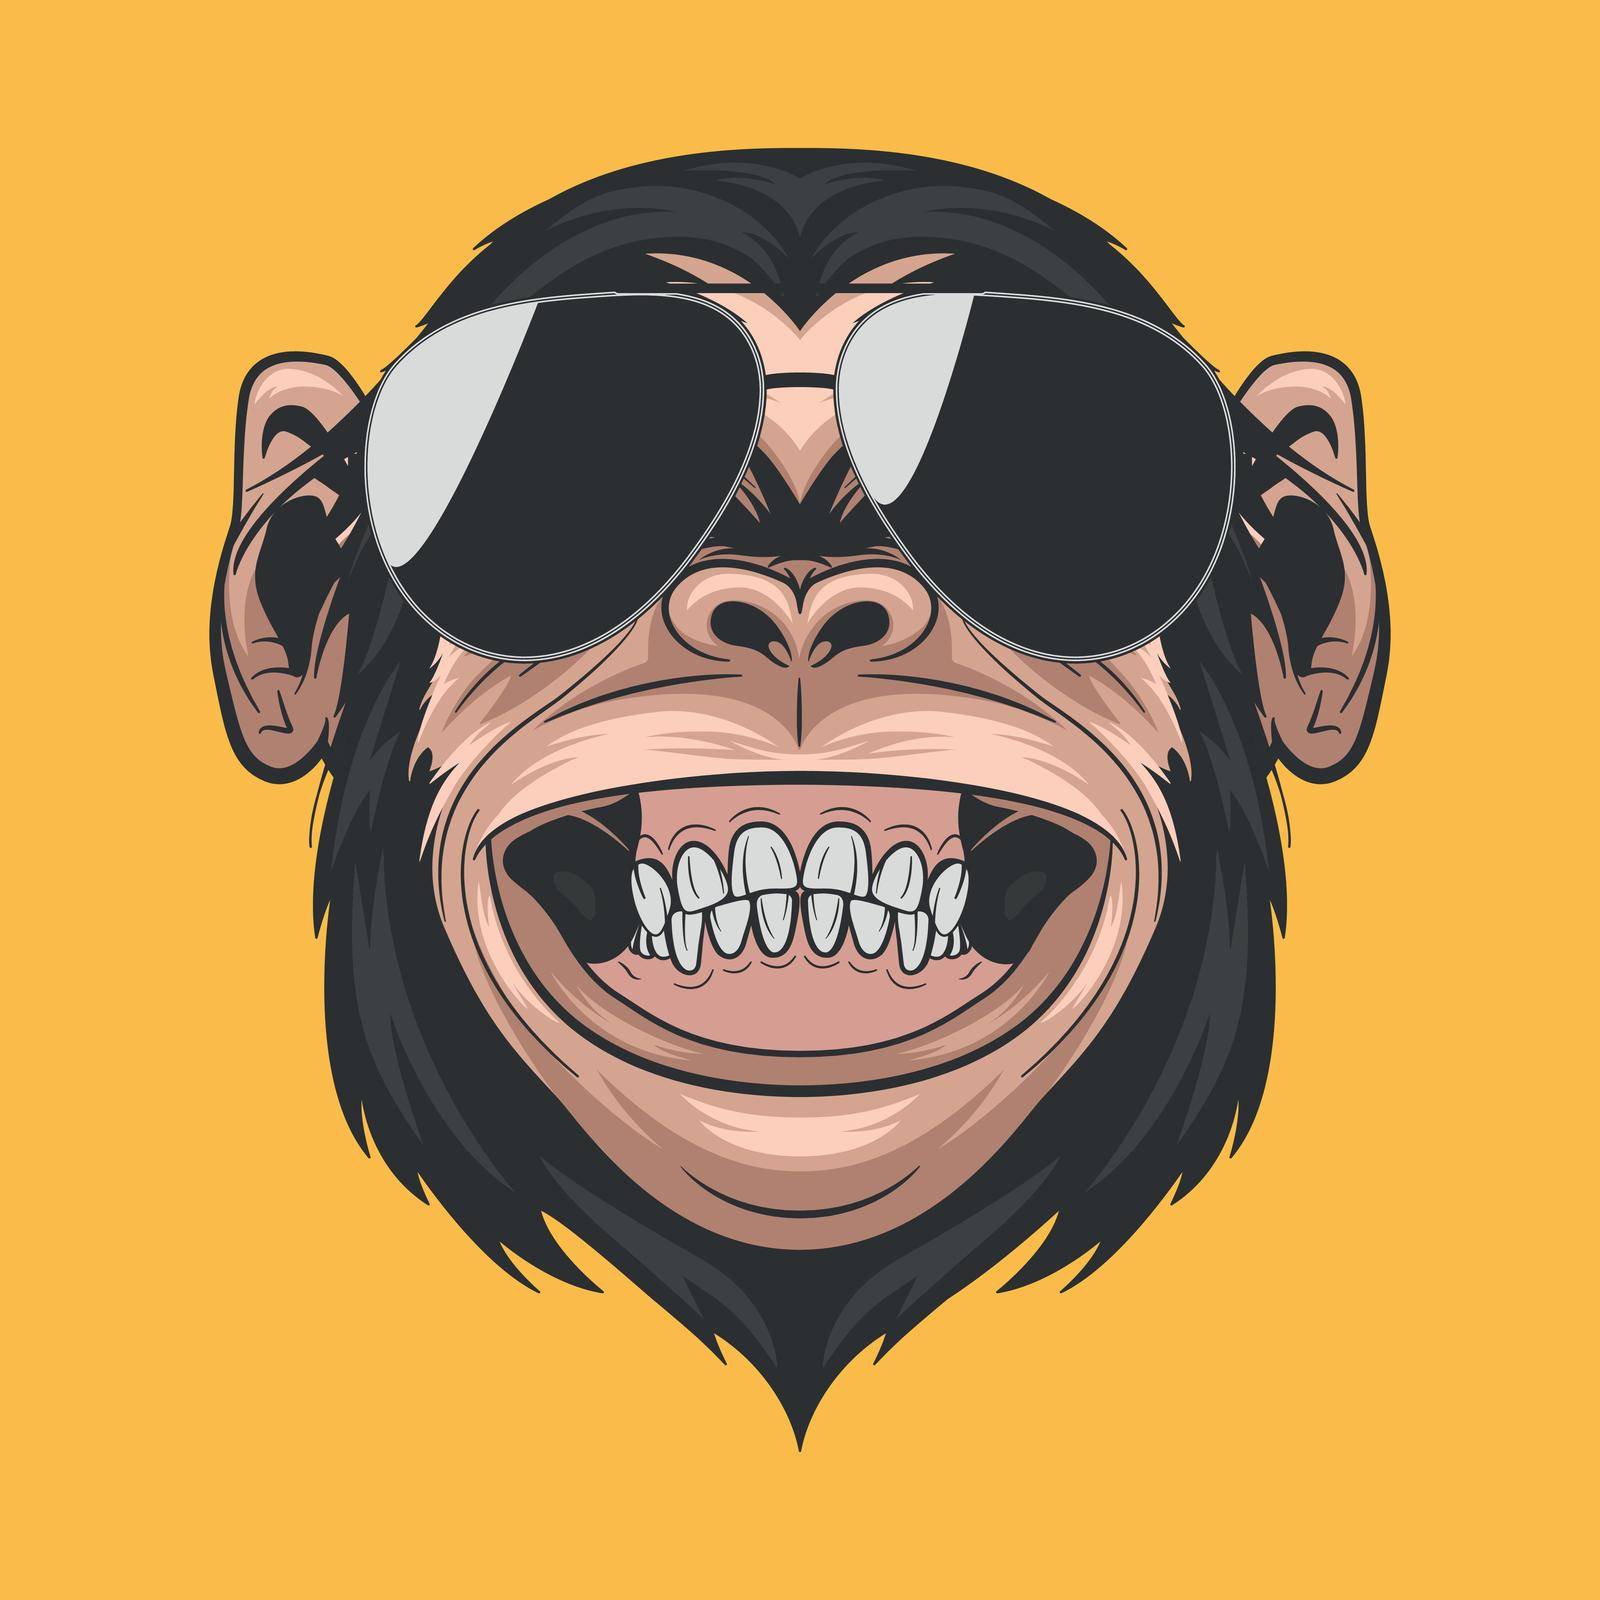 Vector Hand Drawn Smiling Chimpanzee Ape with Sunglasses. Colored Abstract Funny Monkey Head for Wall Art, T-shirt Print, Poster. Cartoon Cute Chimp Monkey Icon, Logo, Illustration by Gomolach